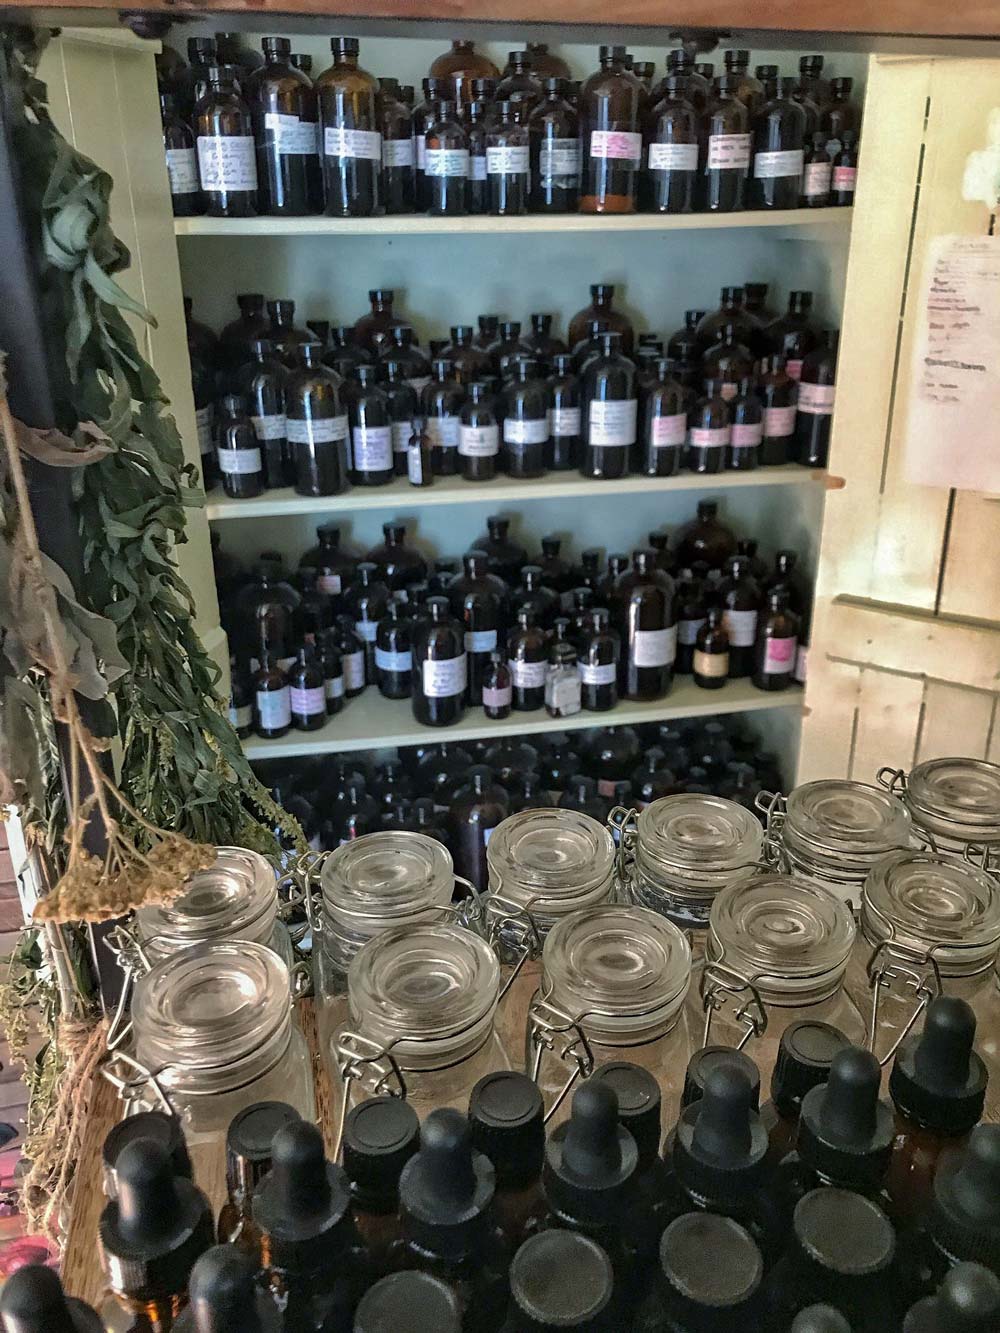 Clean jars and bottles waiting to store dried herbs and herbal preparations.